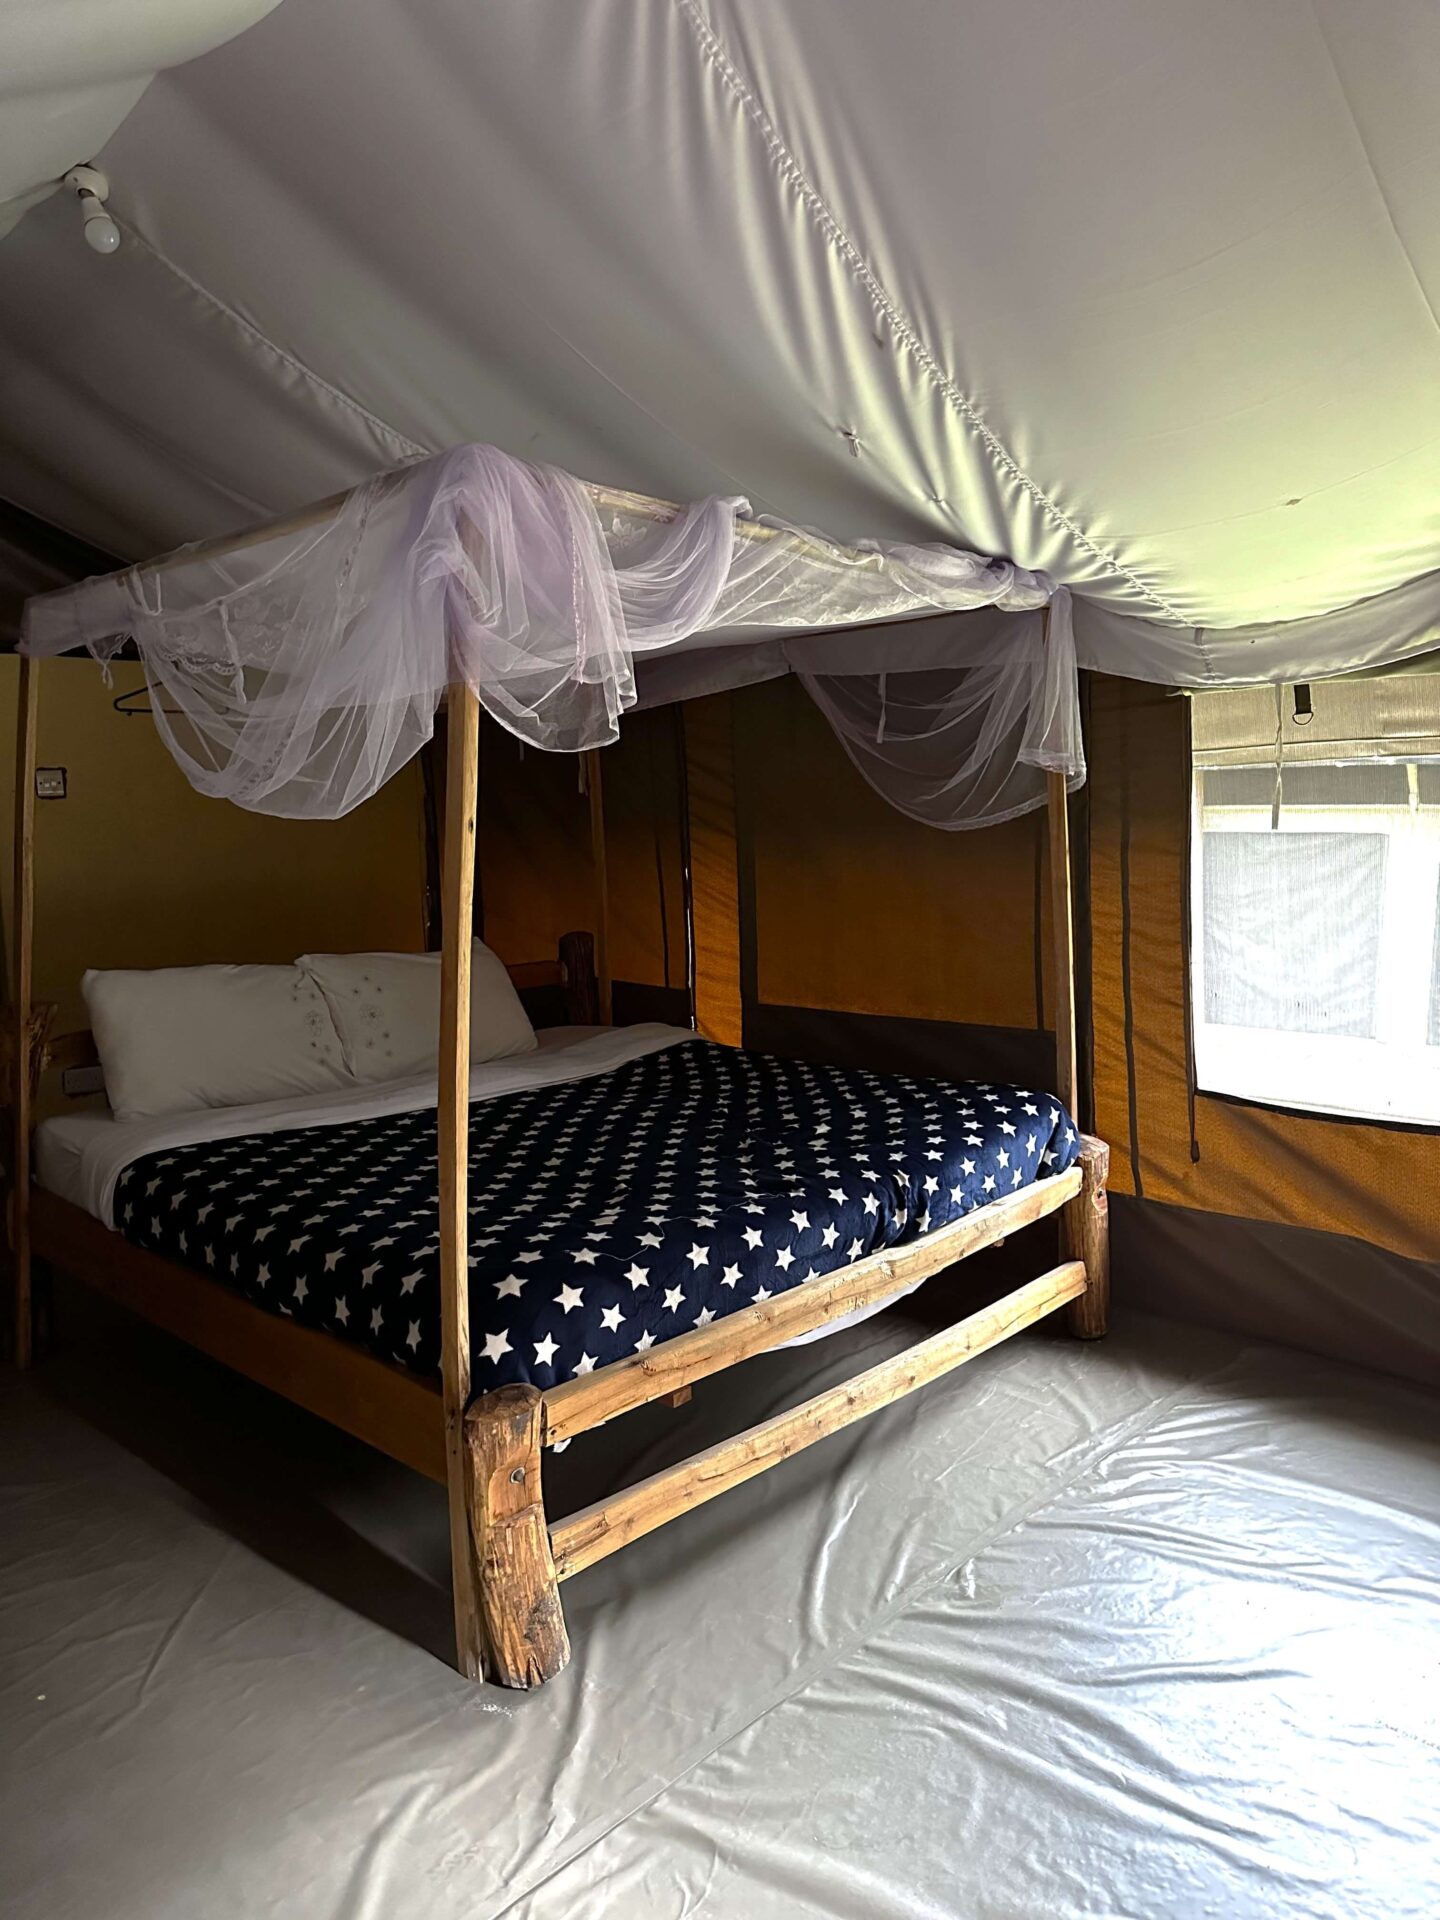 A four poster bed in a large tent.